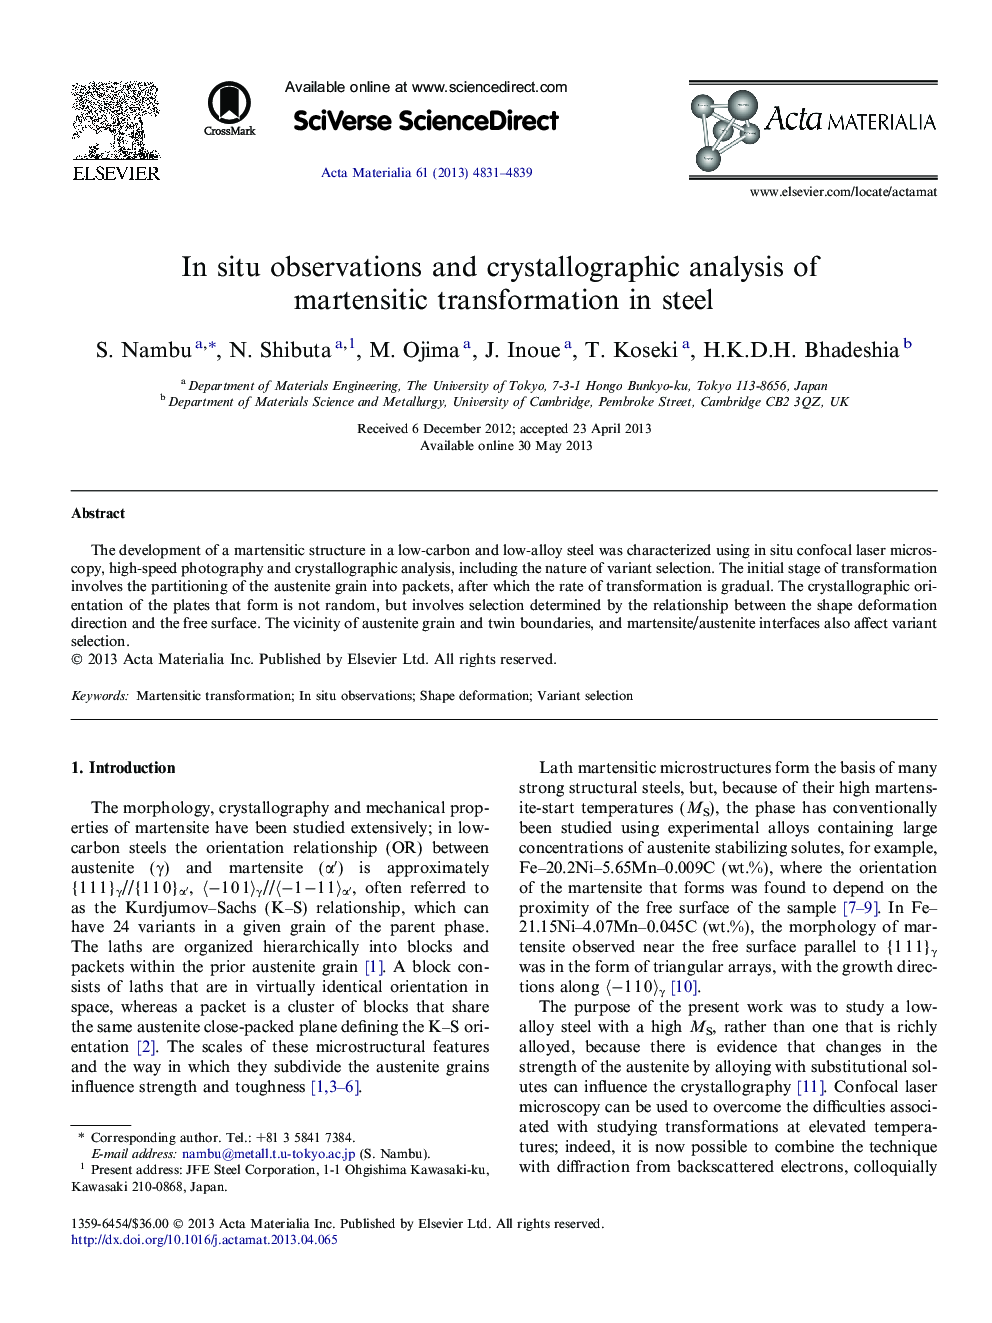 In situ observations and crystallographic analysis of martensitic transformation in steel